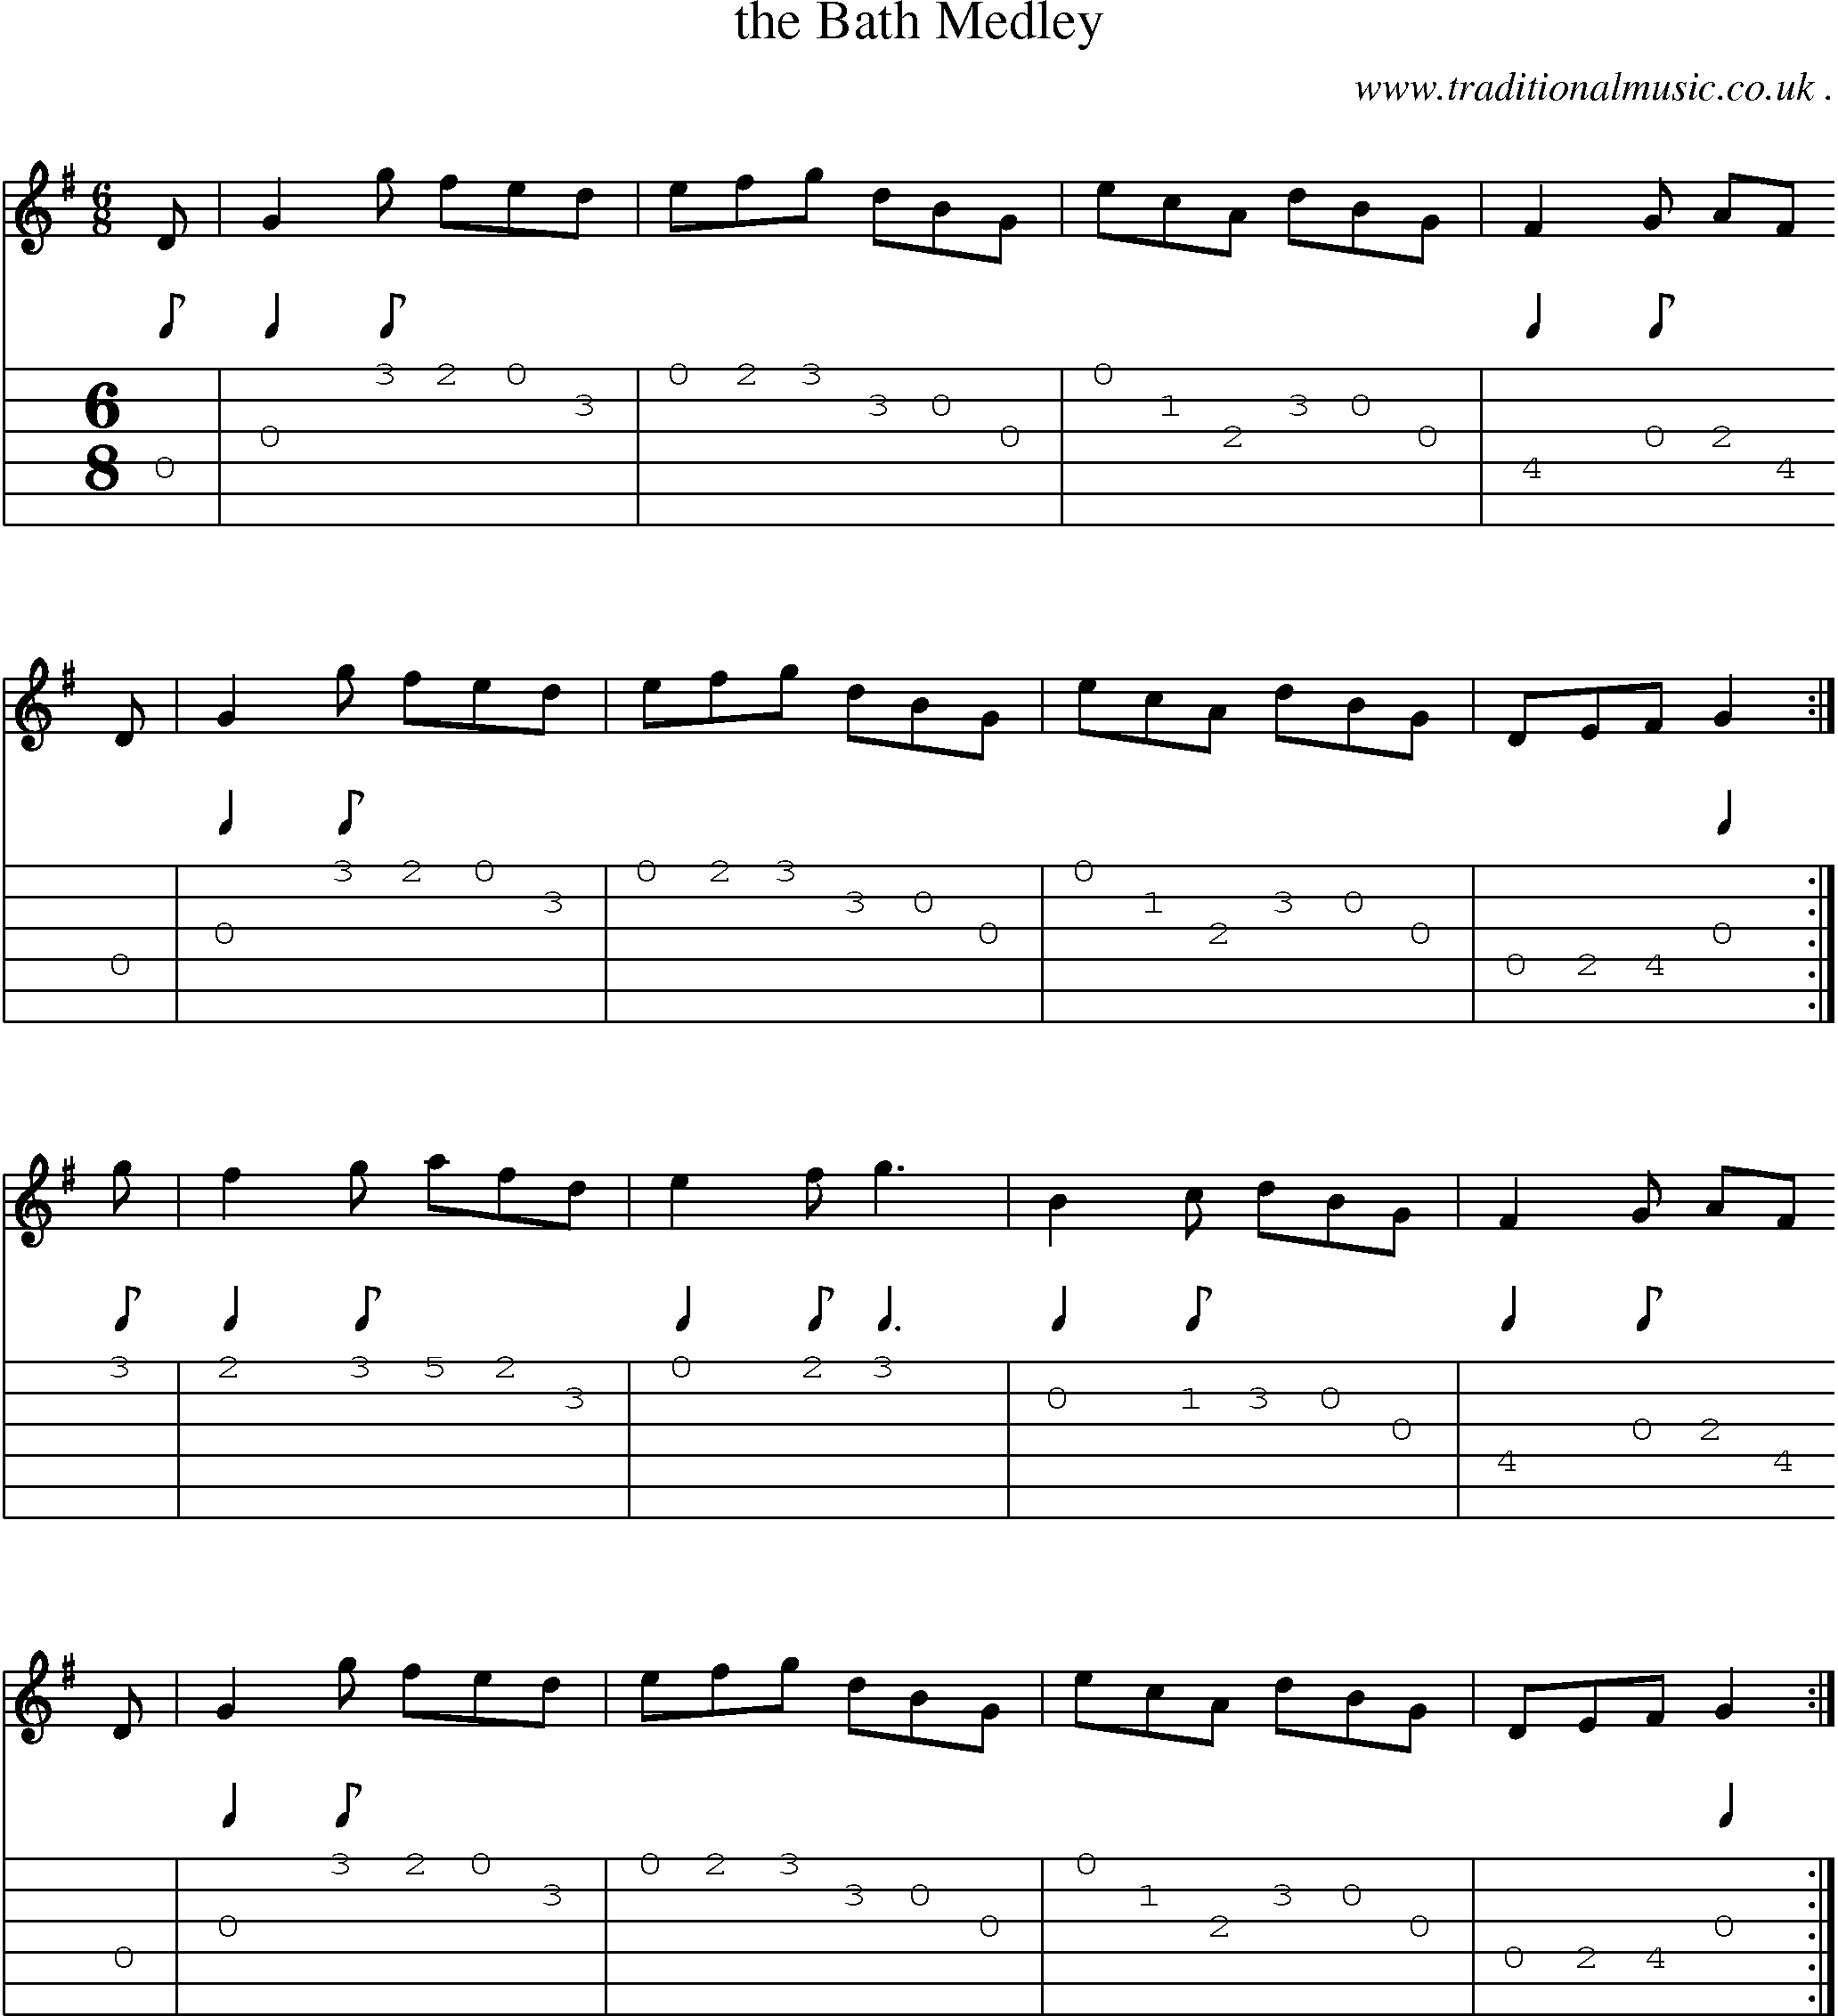 Sheet-Music and Guitar Tabs for The Bath Medley